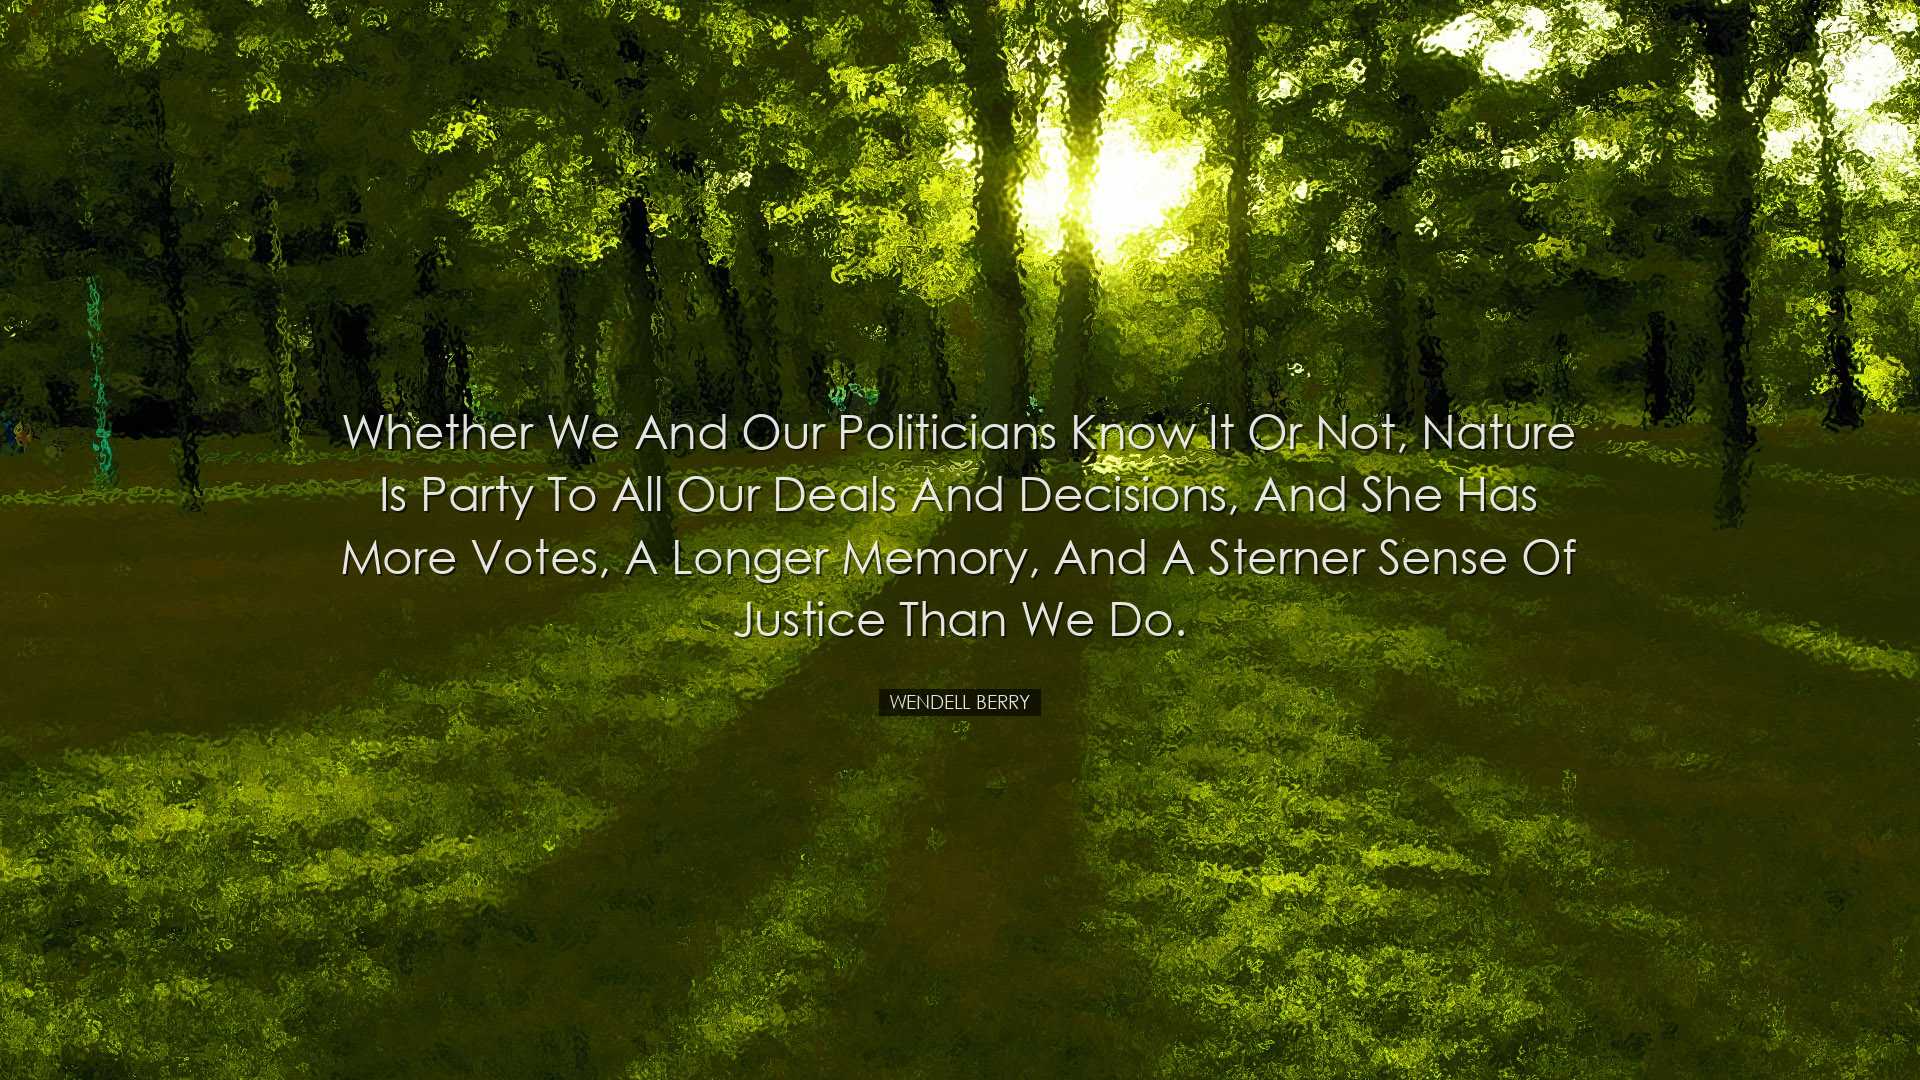 Whether we and our politicians know it or not, Nature is party to